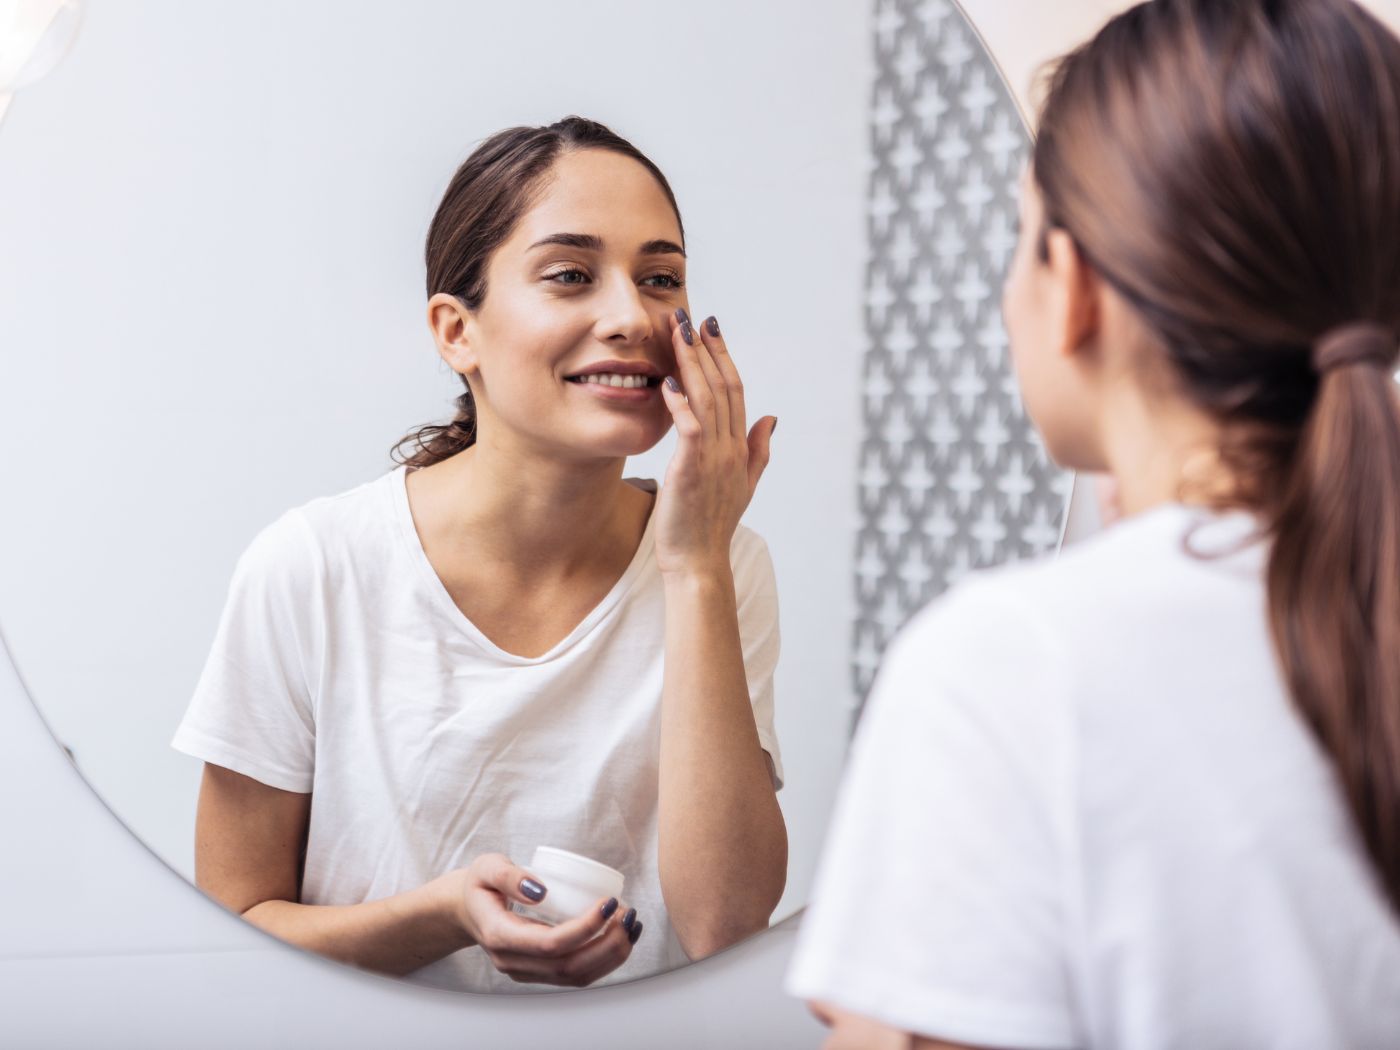 Exhaustive Skin Care Routine Vs Minimal Skin Care Routine – I Tried Both, And This Is What I Learned